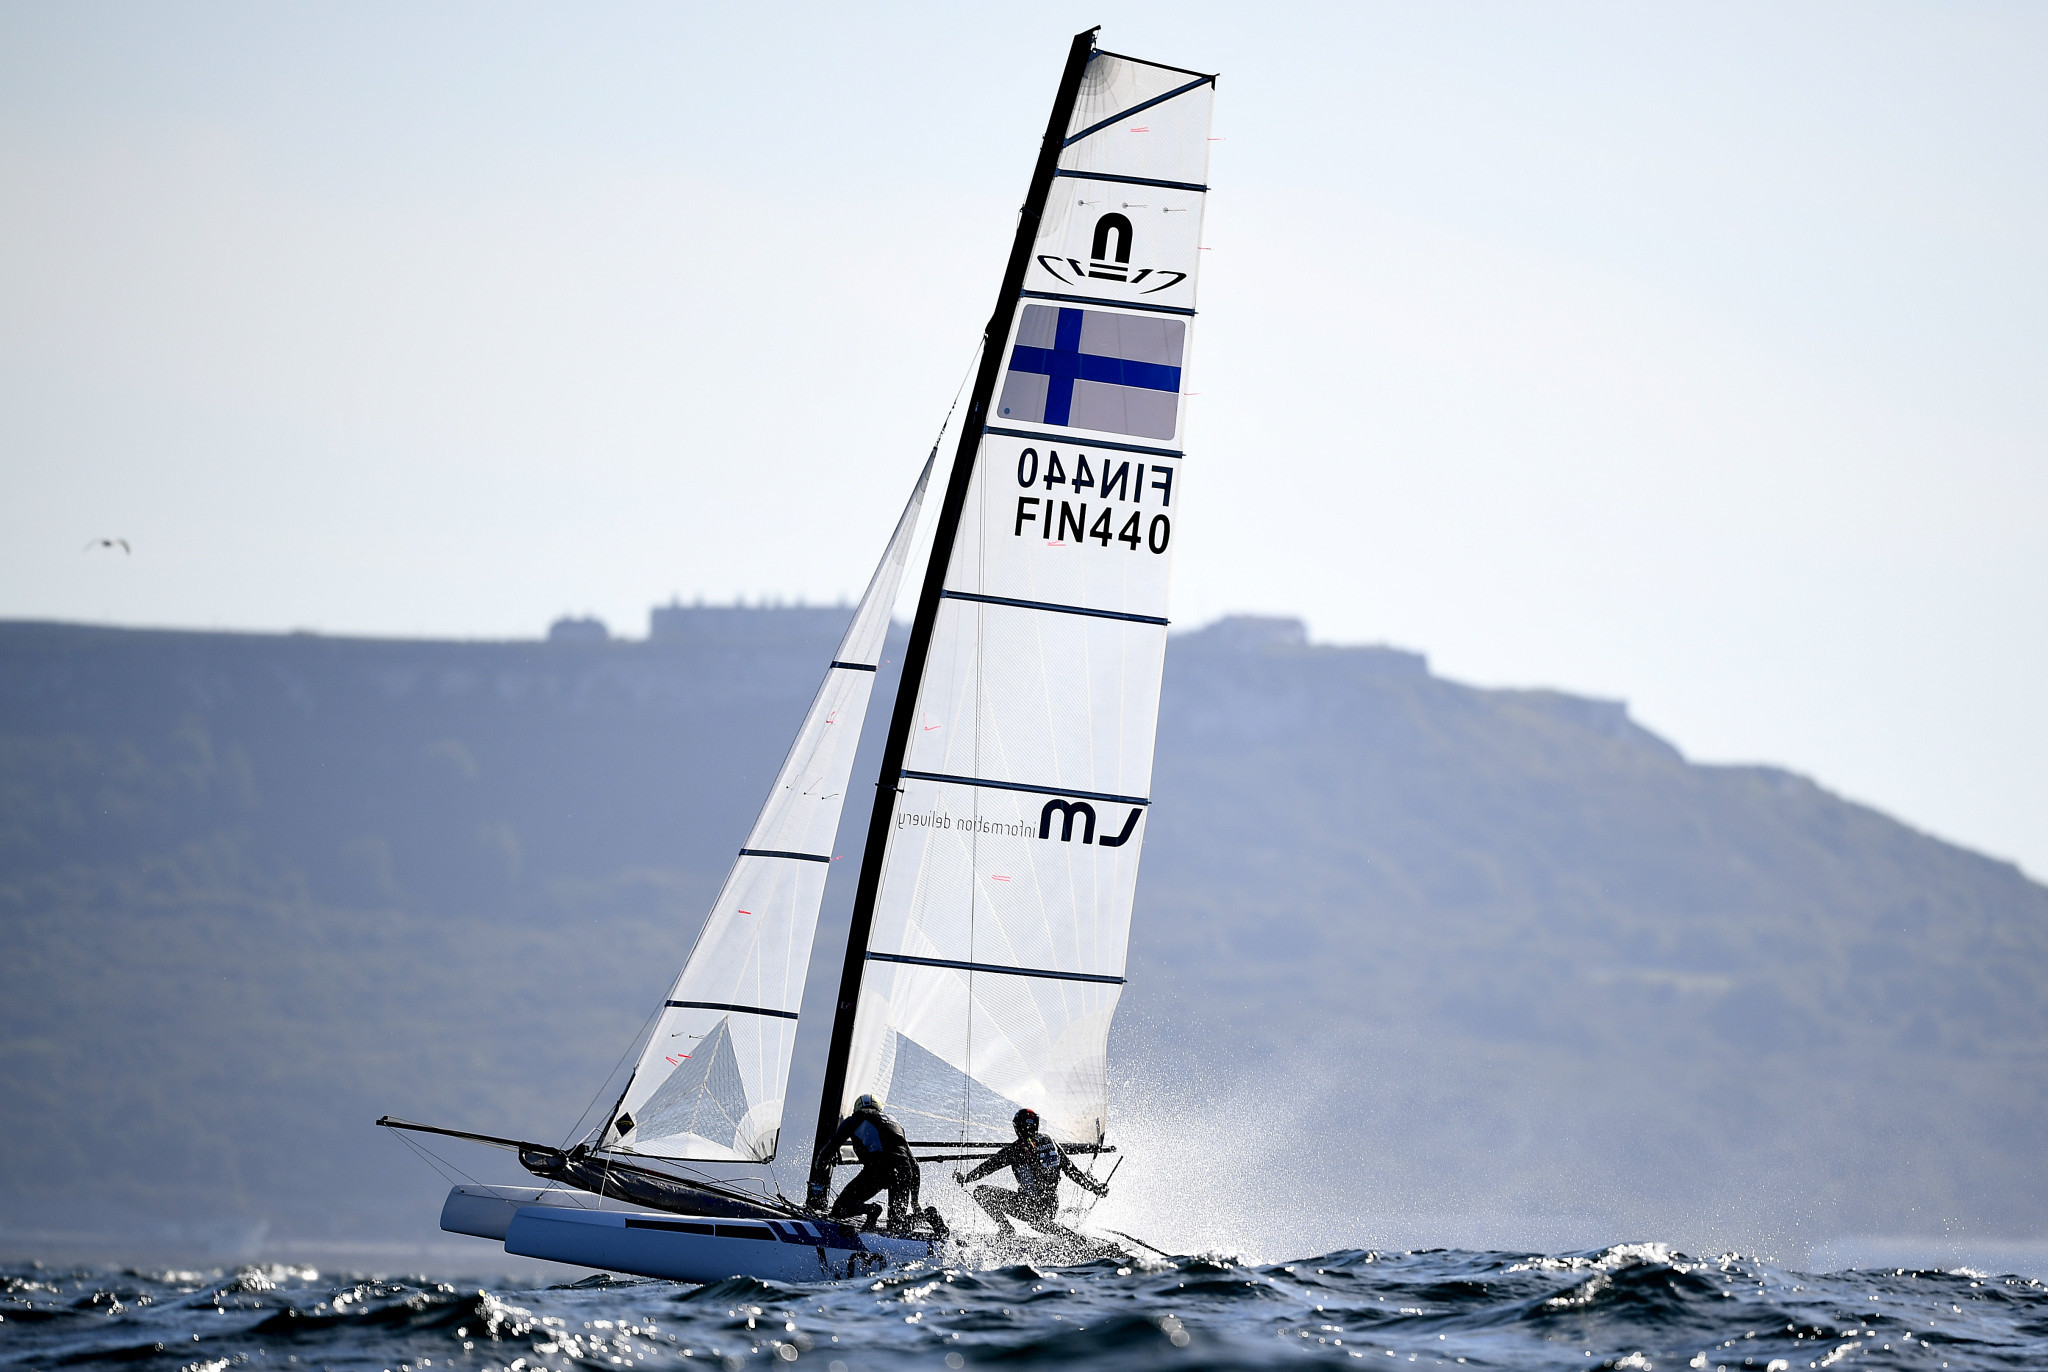 Sinem Kurtbay and Akseli Keskinen will represent Finland in the Nacra 17 event at the Games ©Getty Images